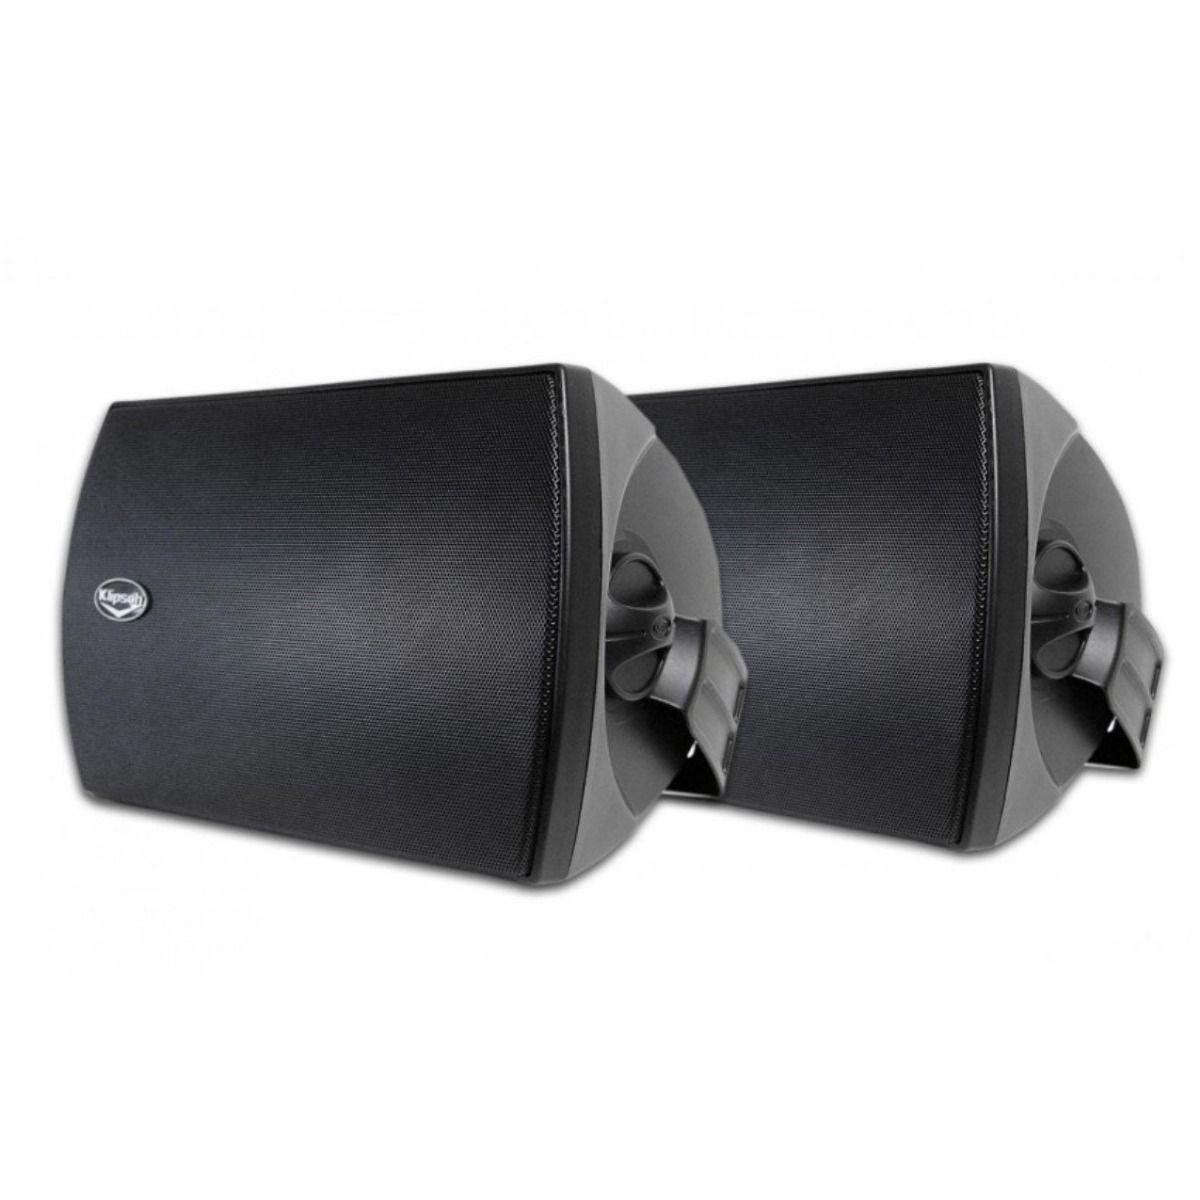 Klipsch AW-525 Pair Outdoor Speakers for $199.95 Shipped